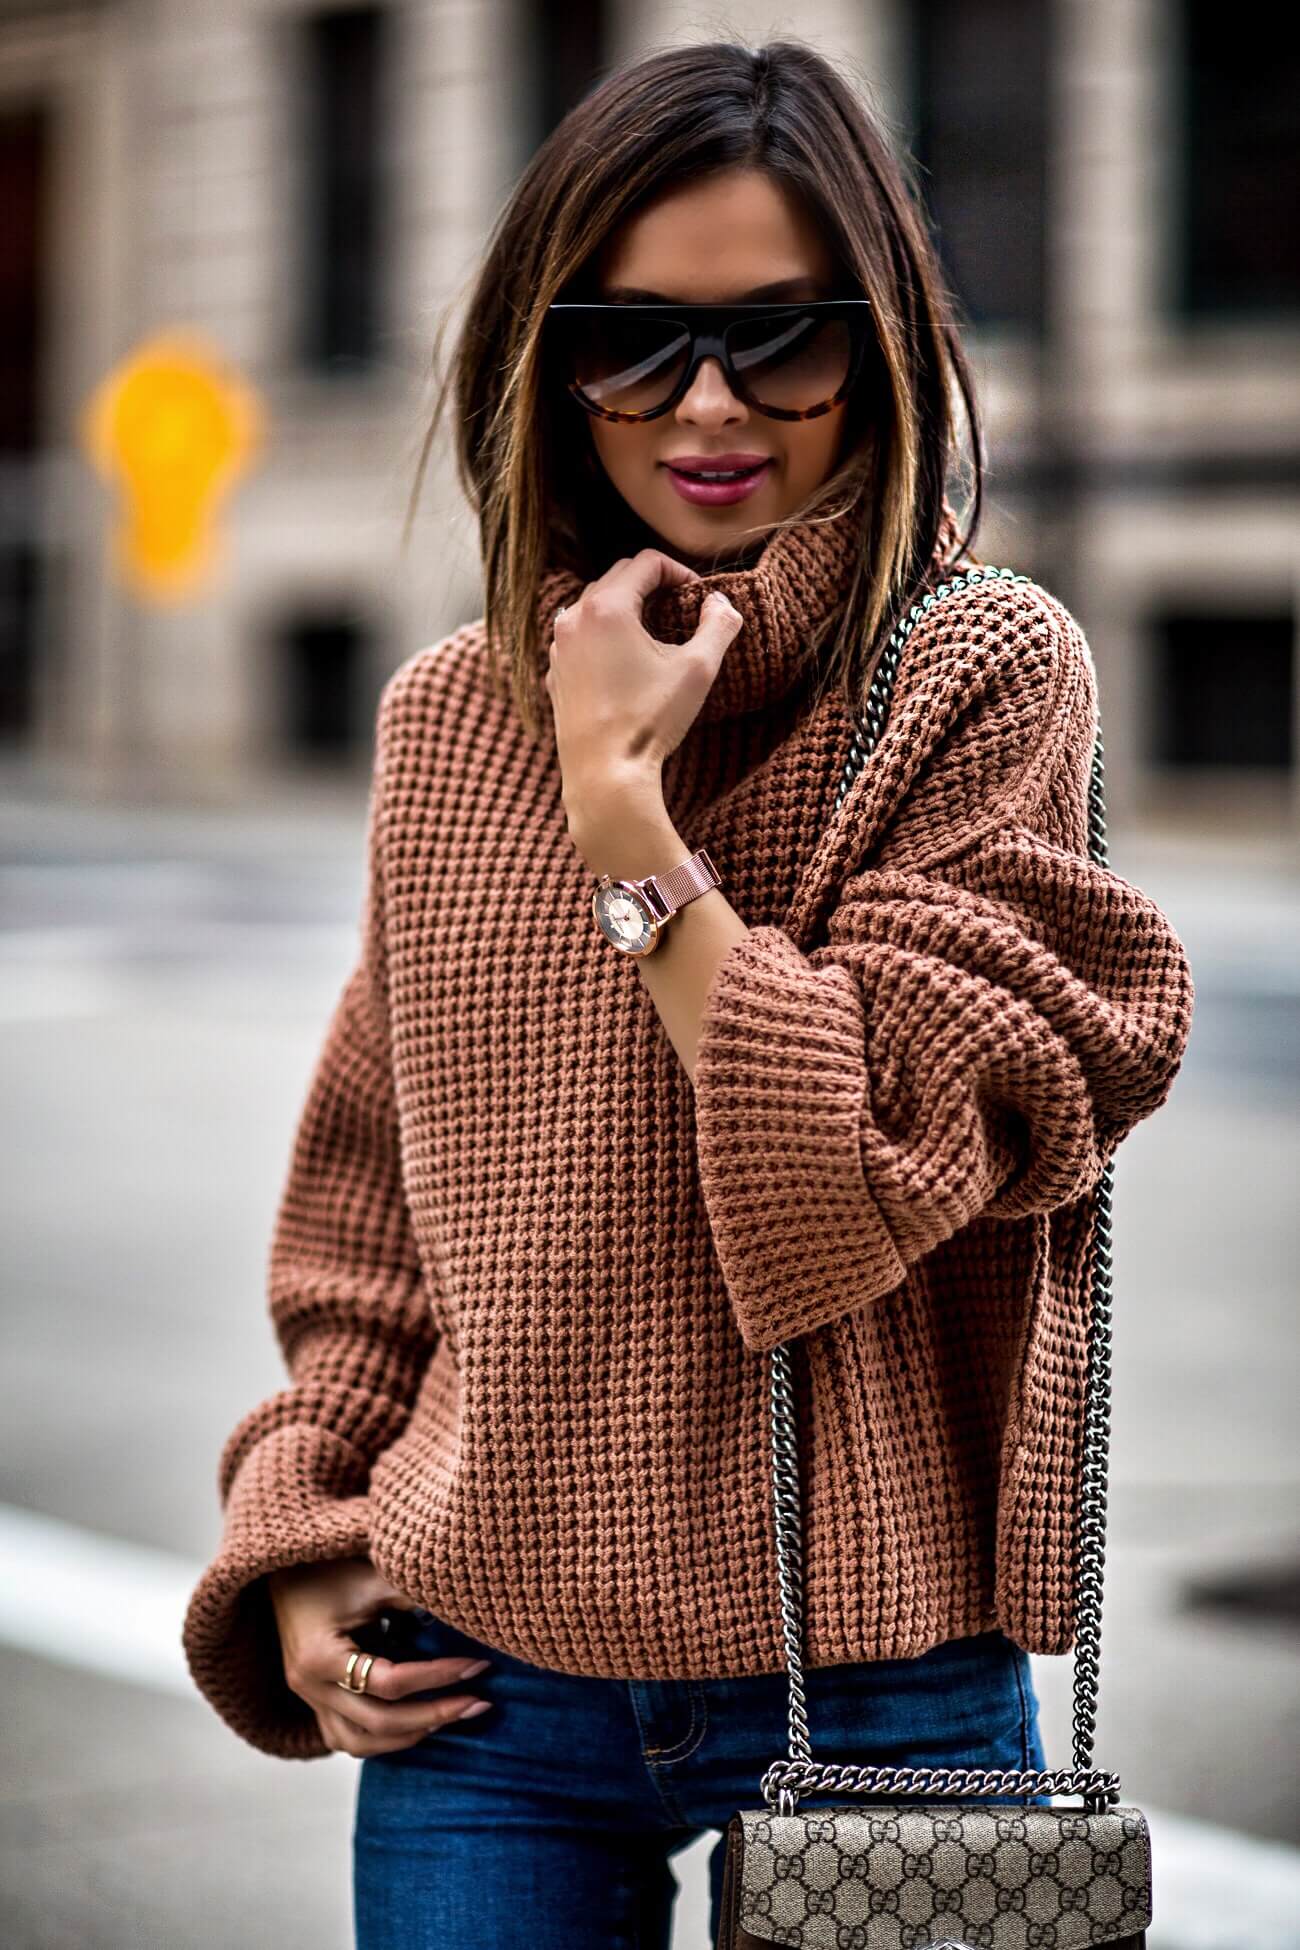 fashion blogger mia mia mine wearing an orange sweater by free people and a kenneth cole watch